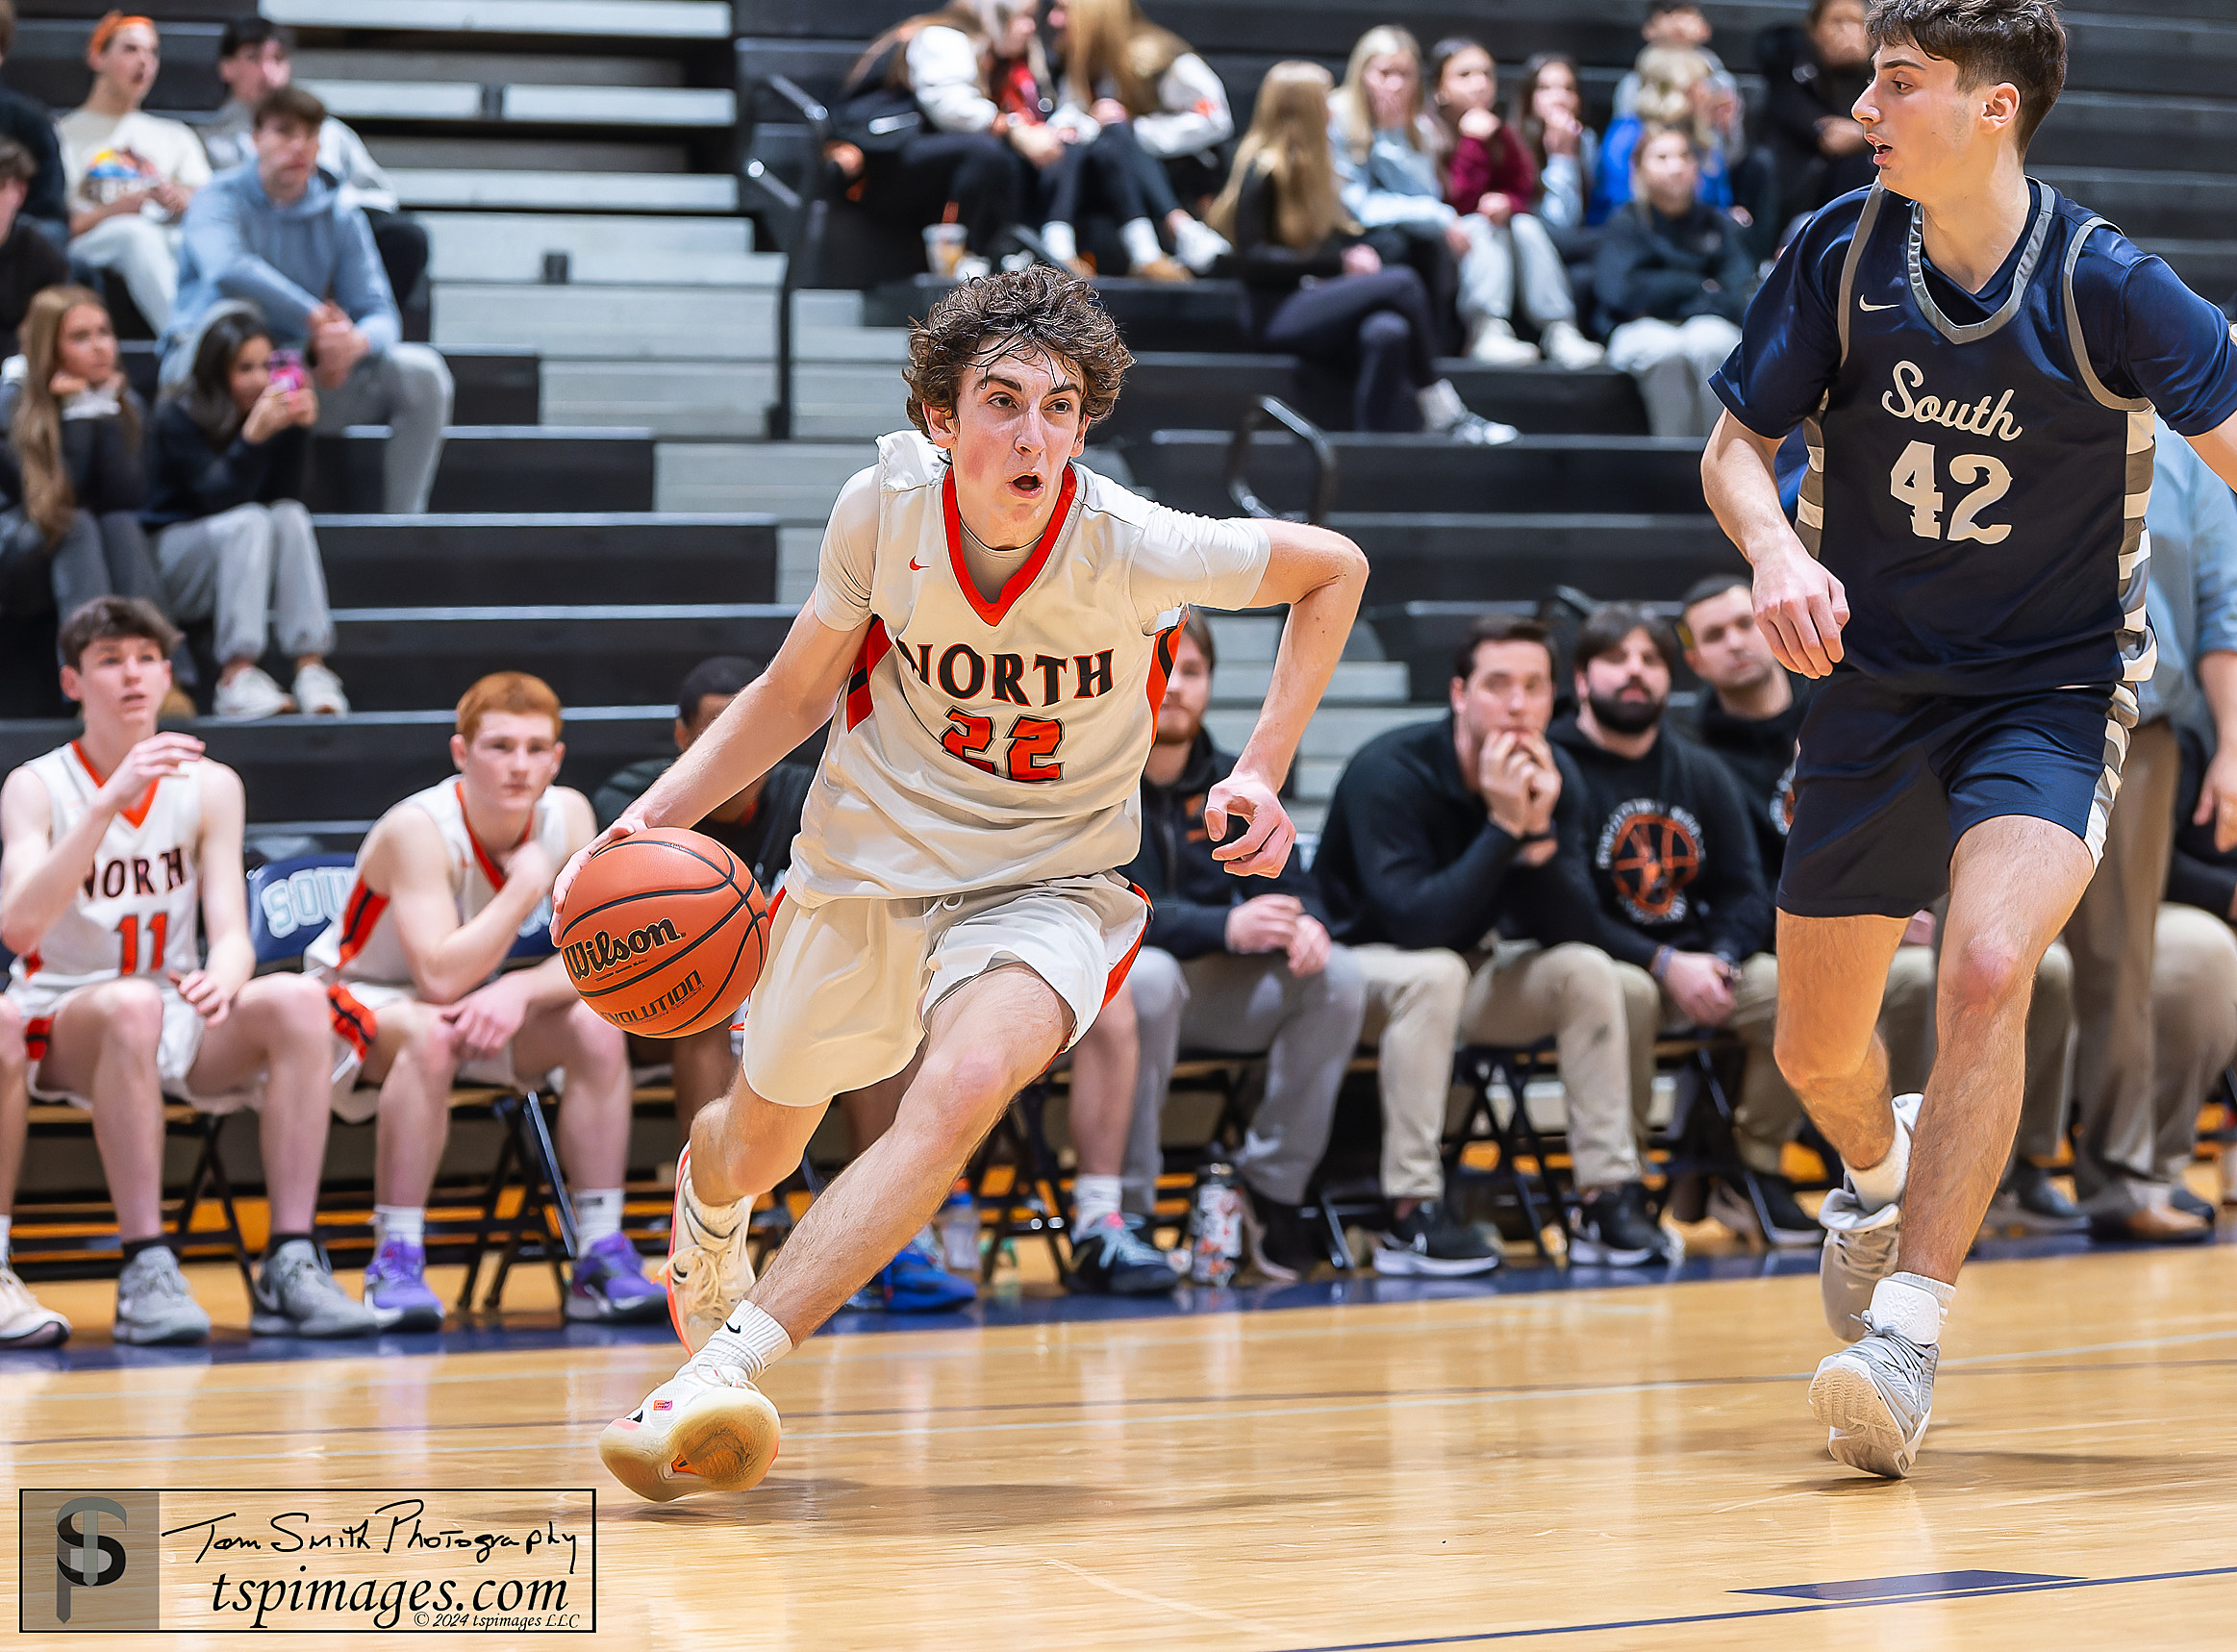 Middletown North junior Colin Byrne dribbles by Middletown South junior Brady Hahn. (Photo: Tom Smith | tspsportsimages.com)